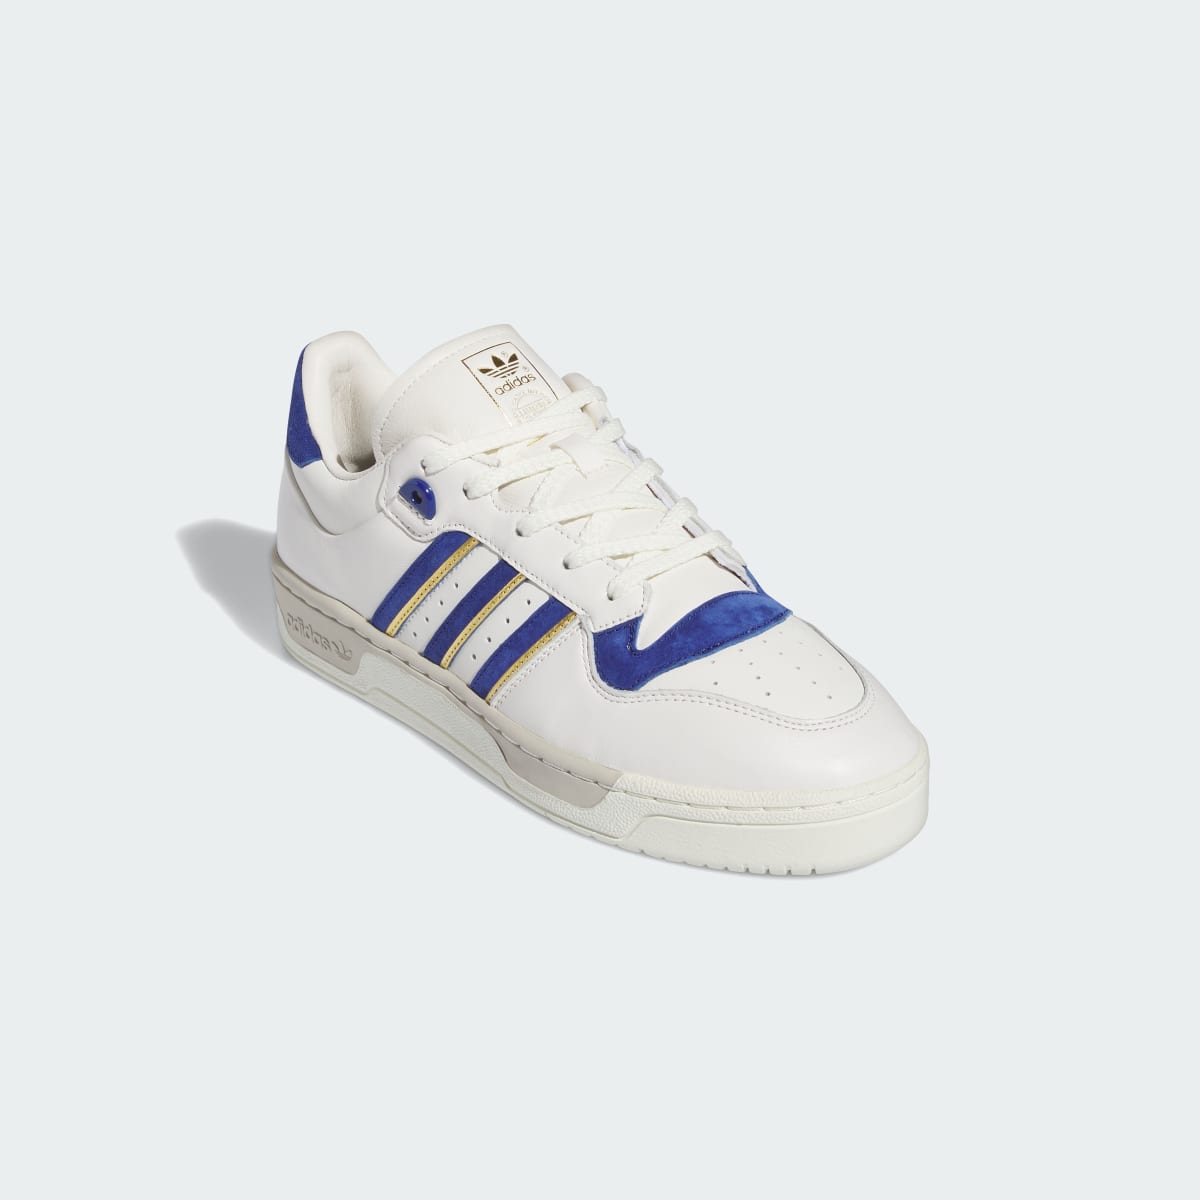 Adidas Rivalry 86 Low Schuh. 5